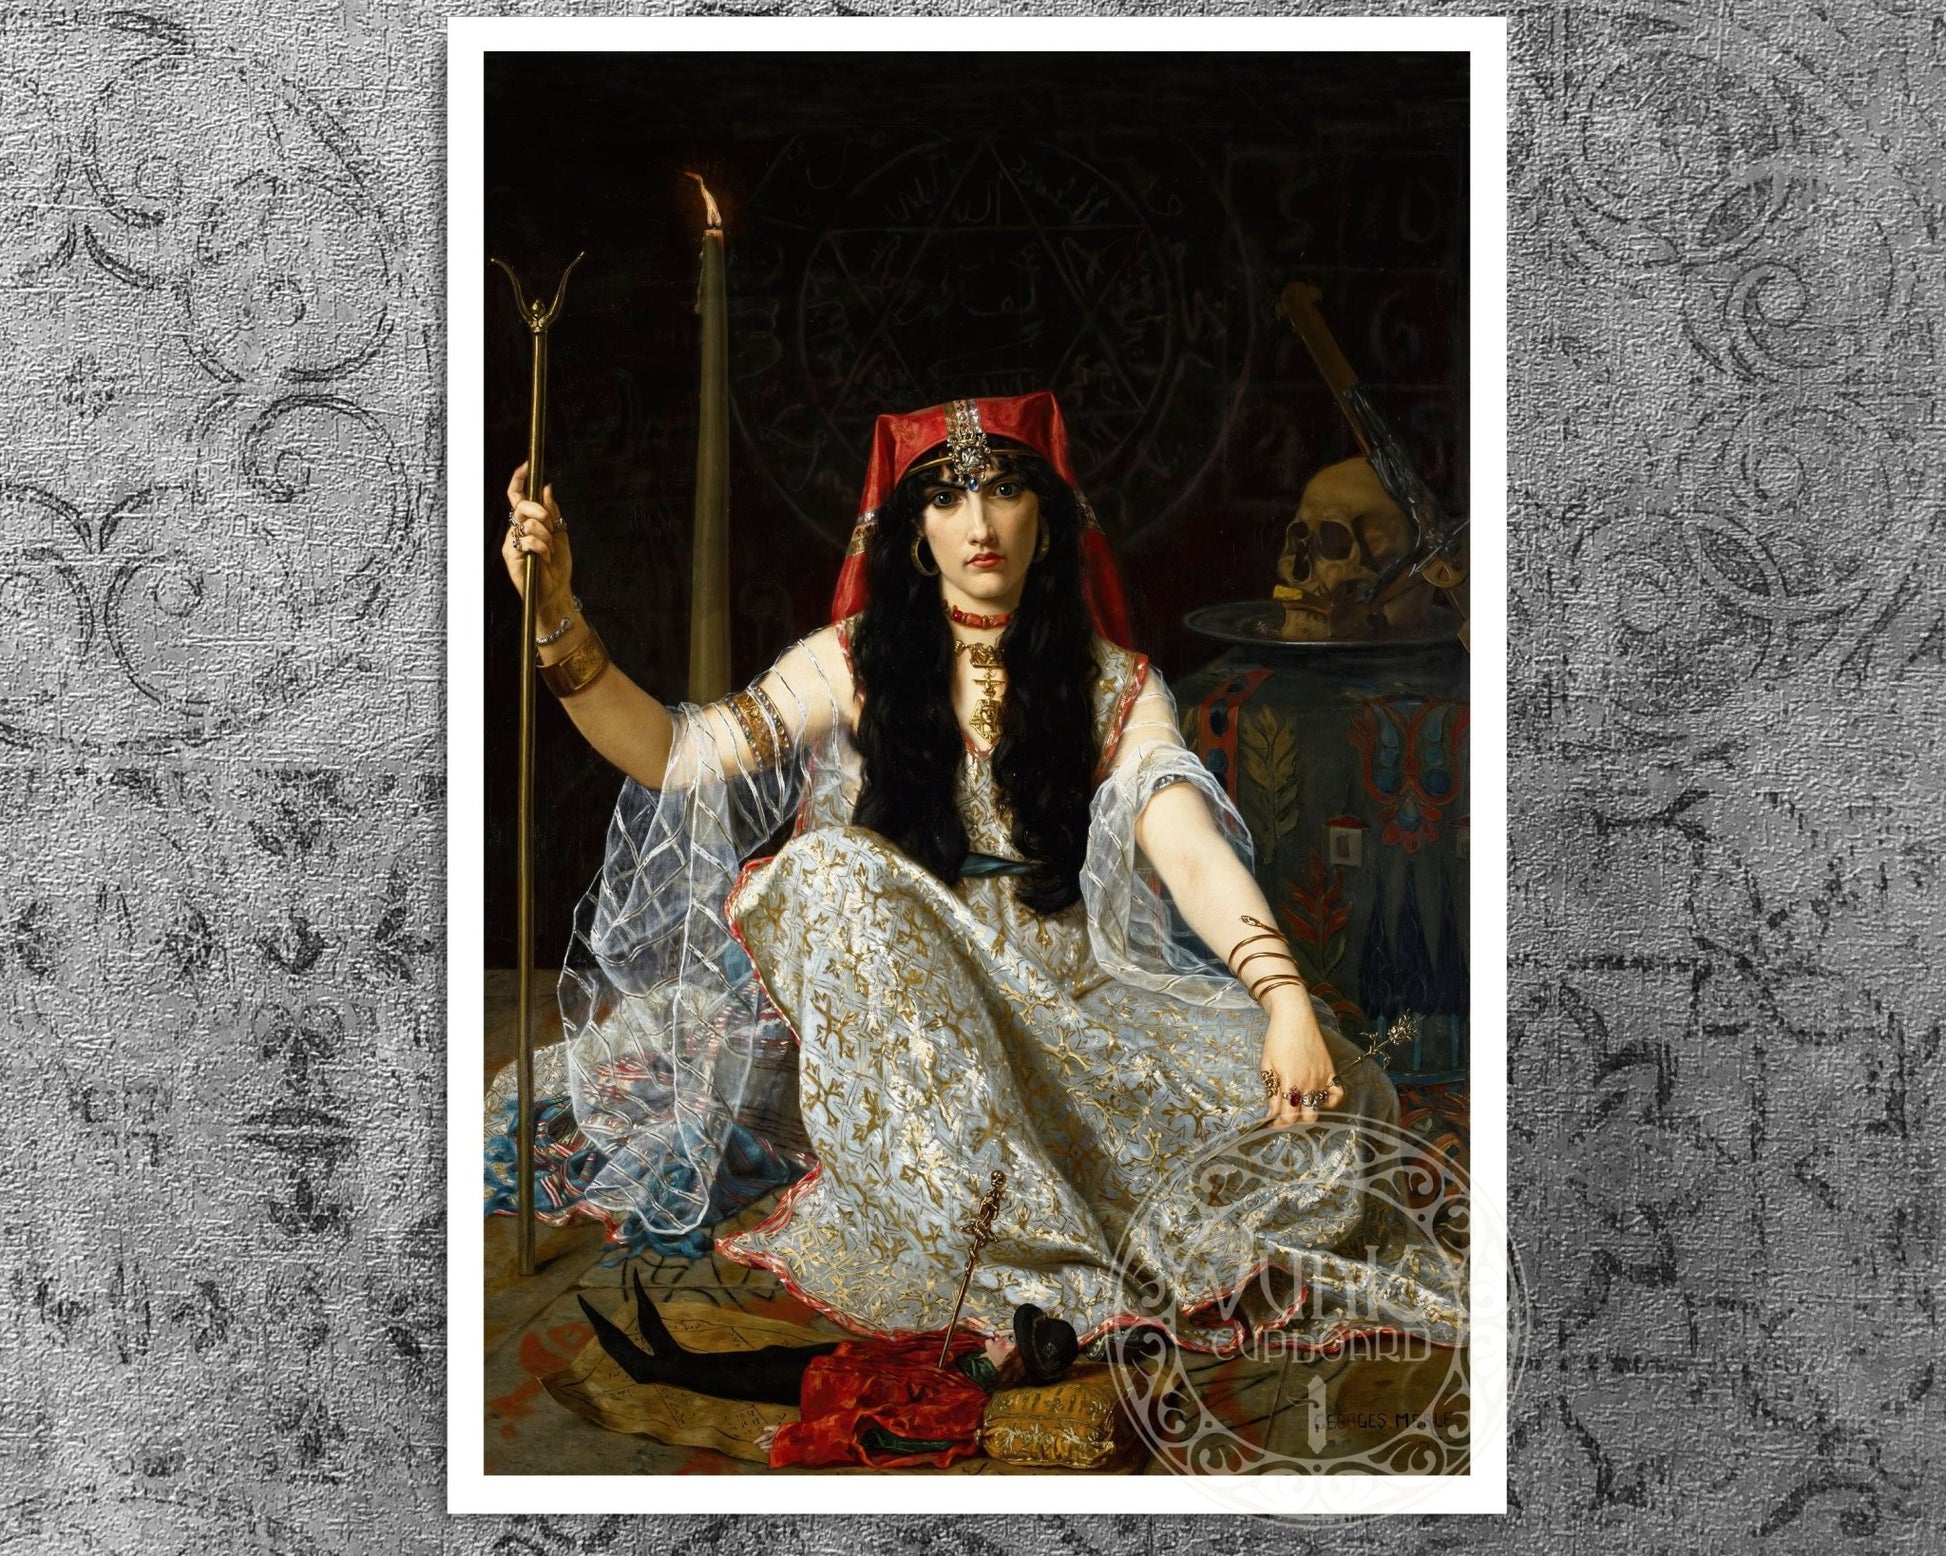 Georges Merle "L'Envoûteuse / The Sorceress" (c.1883) - Mabon Gallery